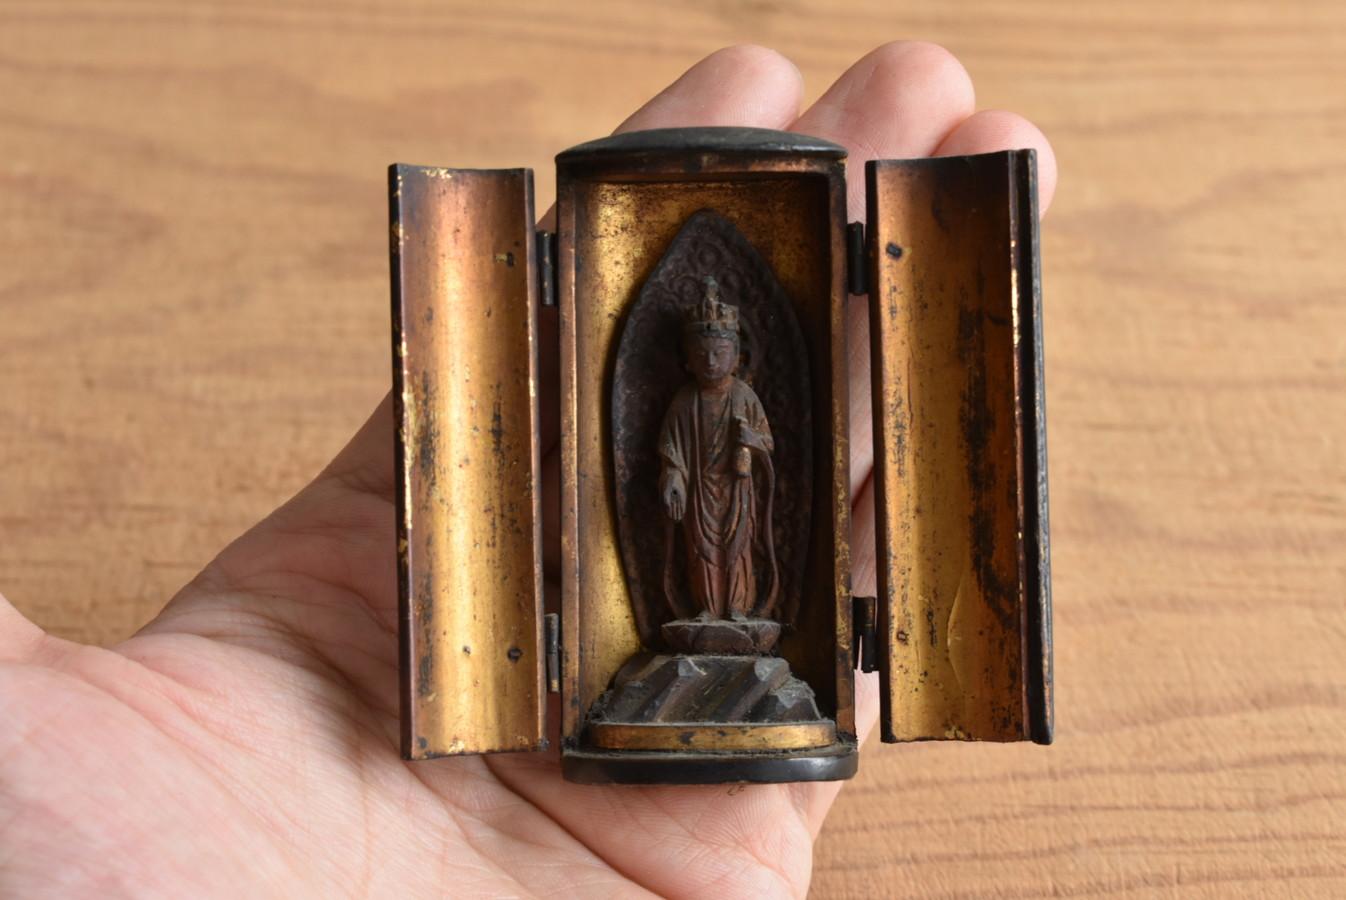 This is a wooden Buddha statue made during the Edo period in Japan.
It is made in a very small size and fits in the palm of your hand.
Basically, it is designed to be carried while traveling.
It is like a talisman used to pray for safety.
In Japan,